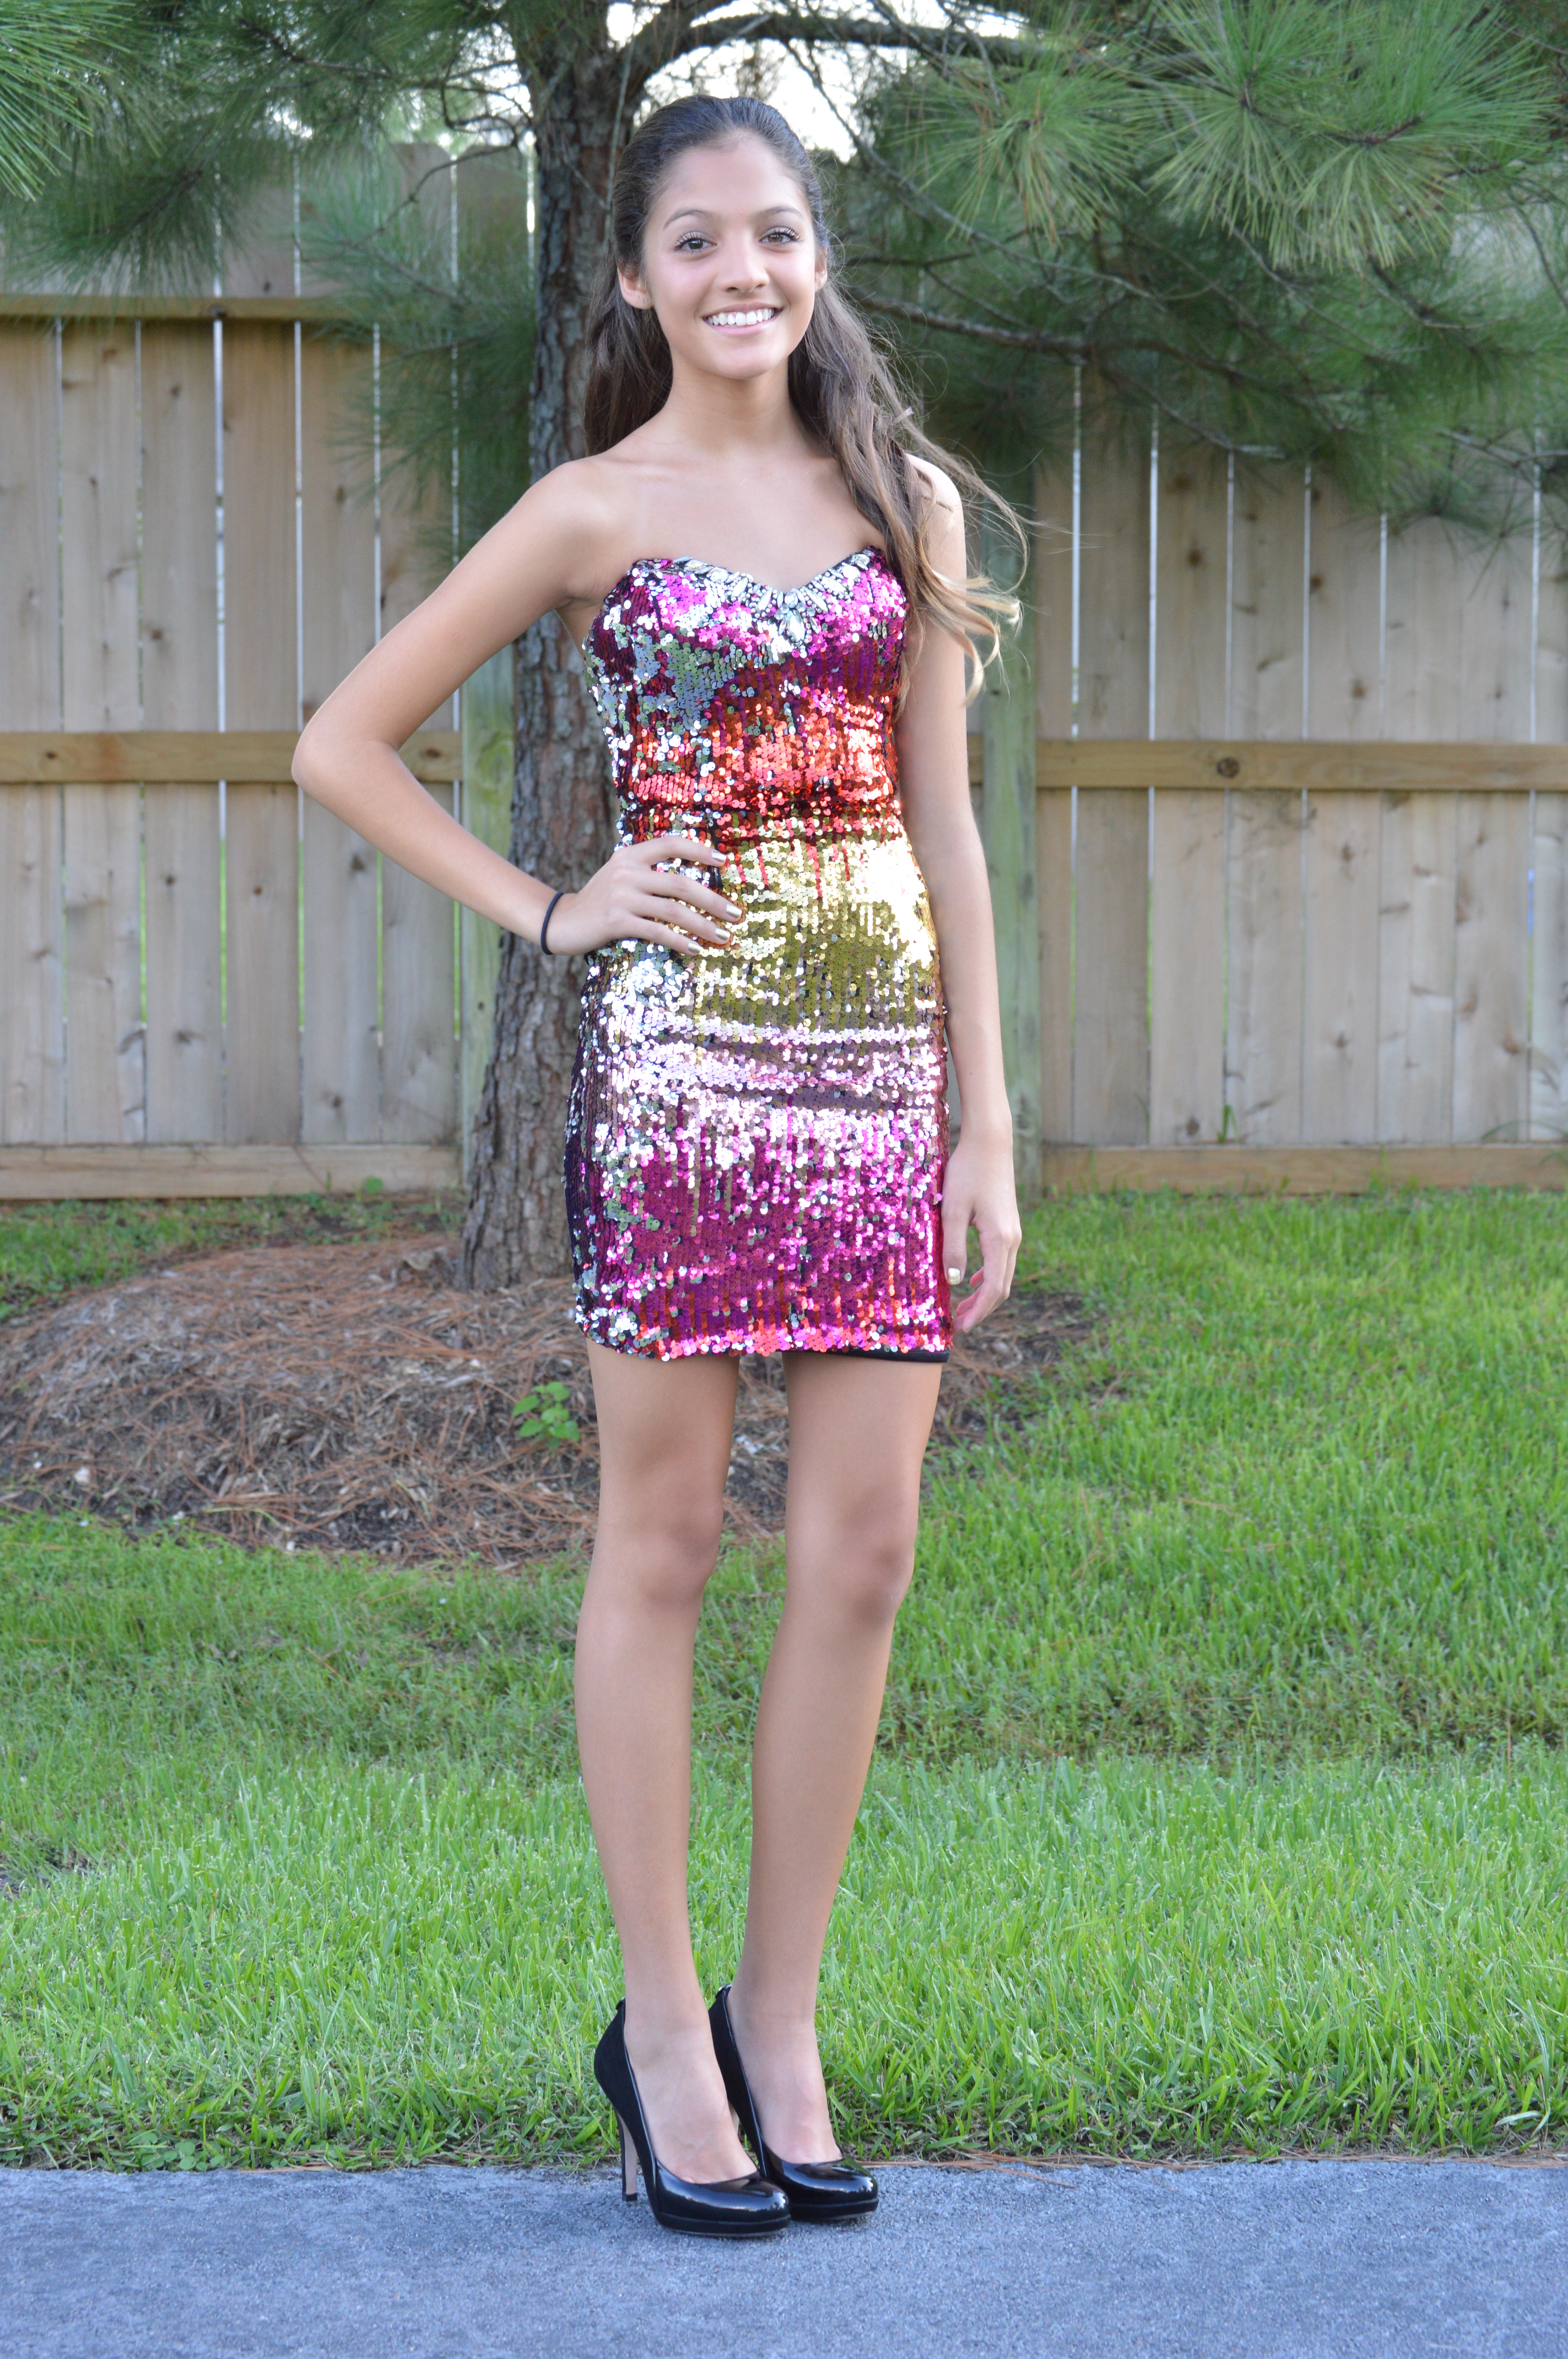 Teen Style Tuesday: Homecoming 